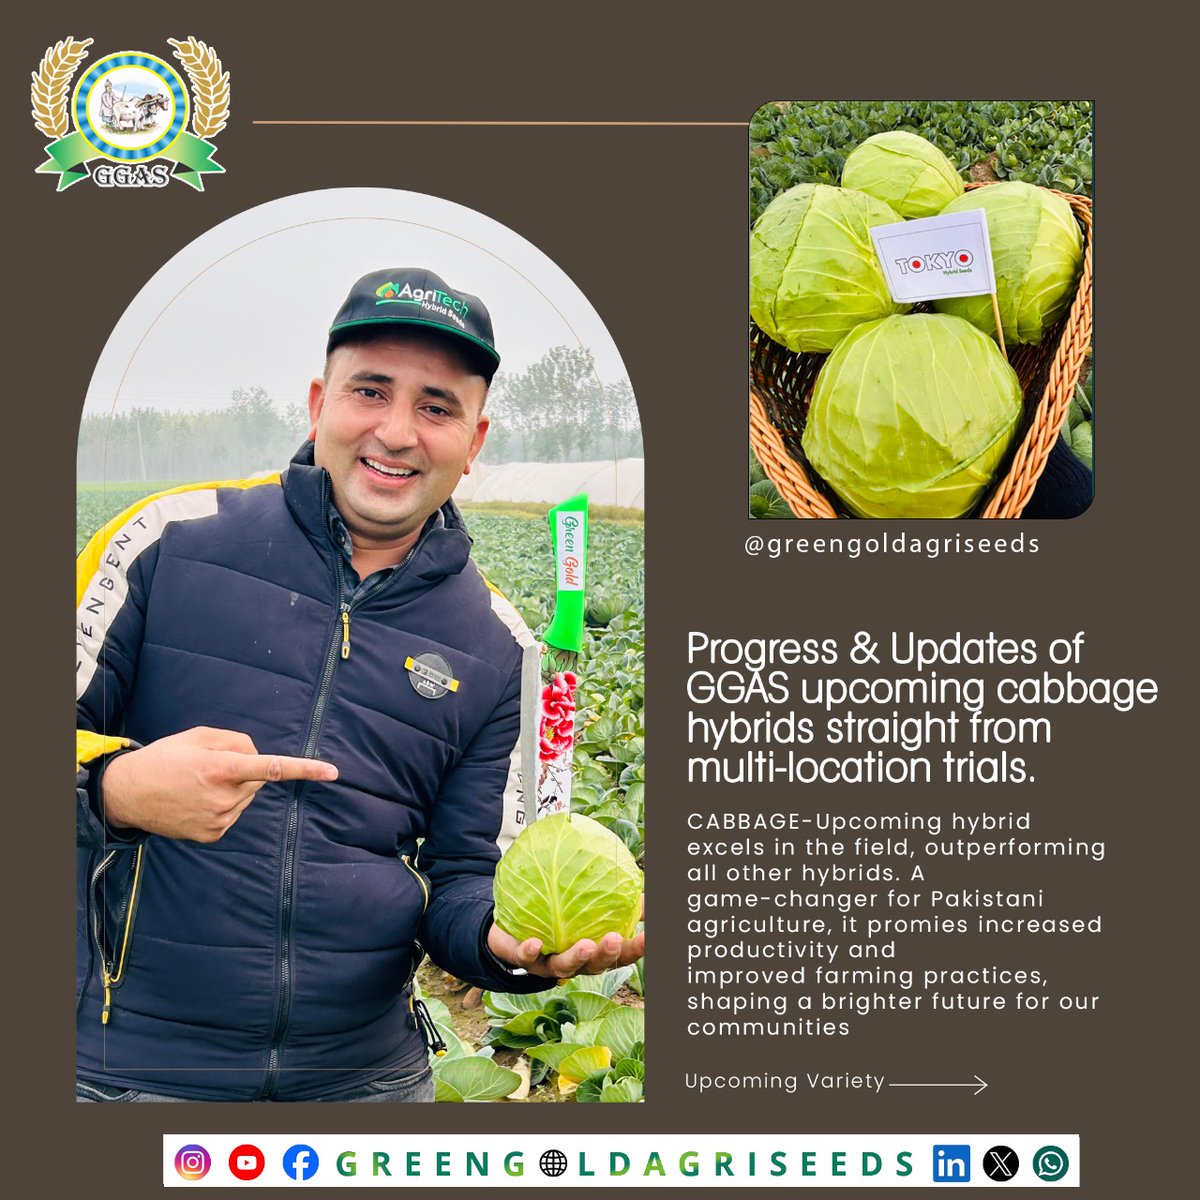 CABBAGE-242649 has demonstrated remarkable performance in field #CabbageInnovation #AgTechAdvancement #FarmSuccess #FutureOfFarming #AgriculturalBreakthrough #CropExcellence #HarvestingSuccess #GreenRevolution #AgInnovation #PakistanAgriTech #CABBAGE242649Success